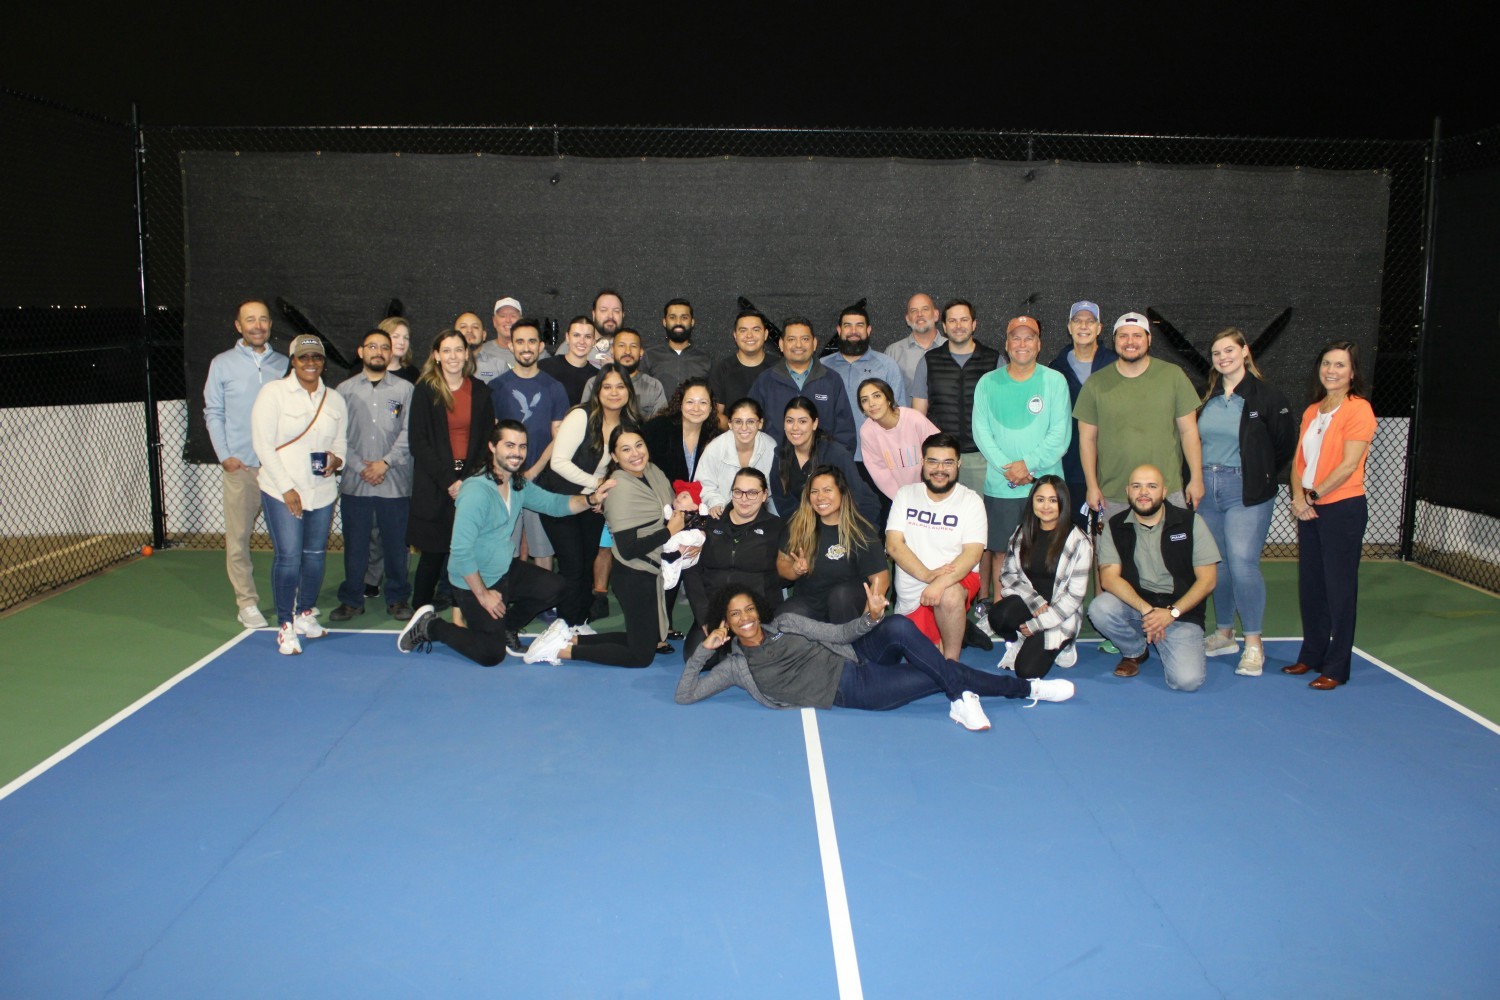 Our inaugural Pickleball Tournament was a success! Employees showcased their skills and camaraderie filled the air. 